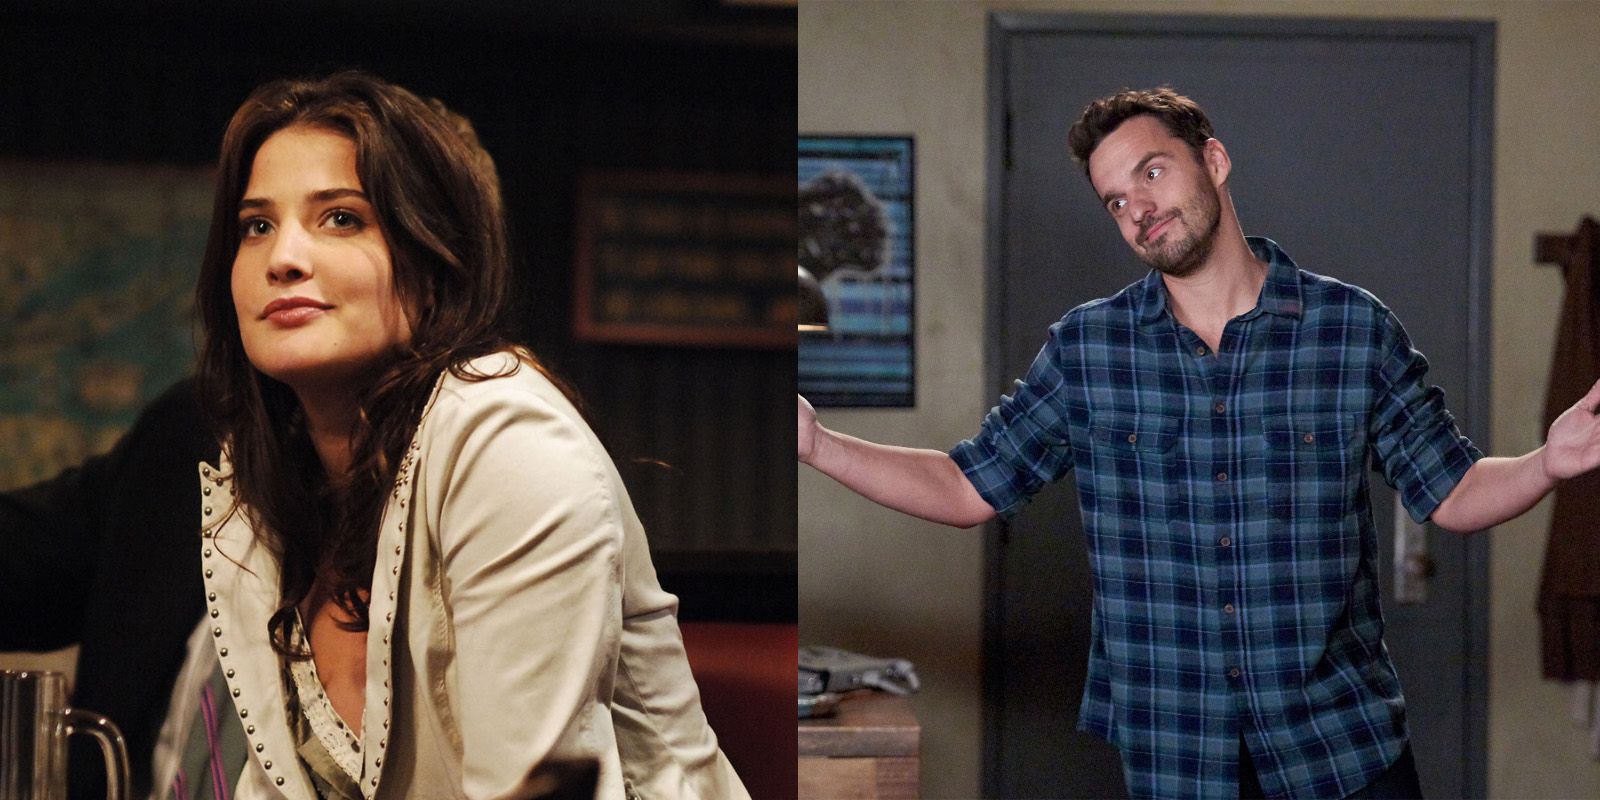 Robin in How I Met Your Mother and Nick in New Girl.